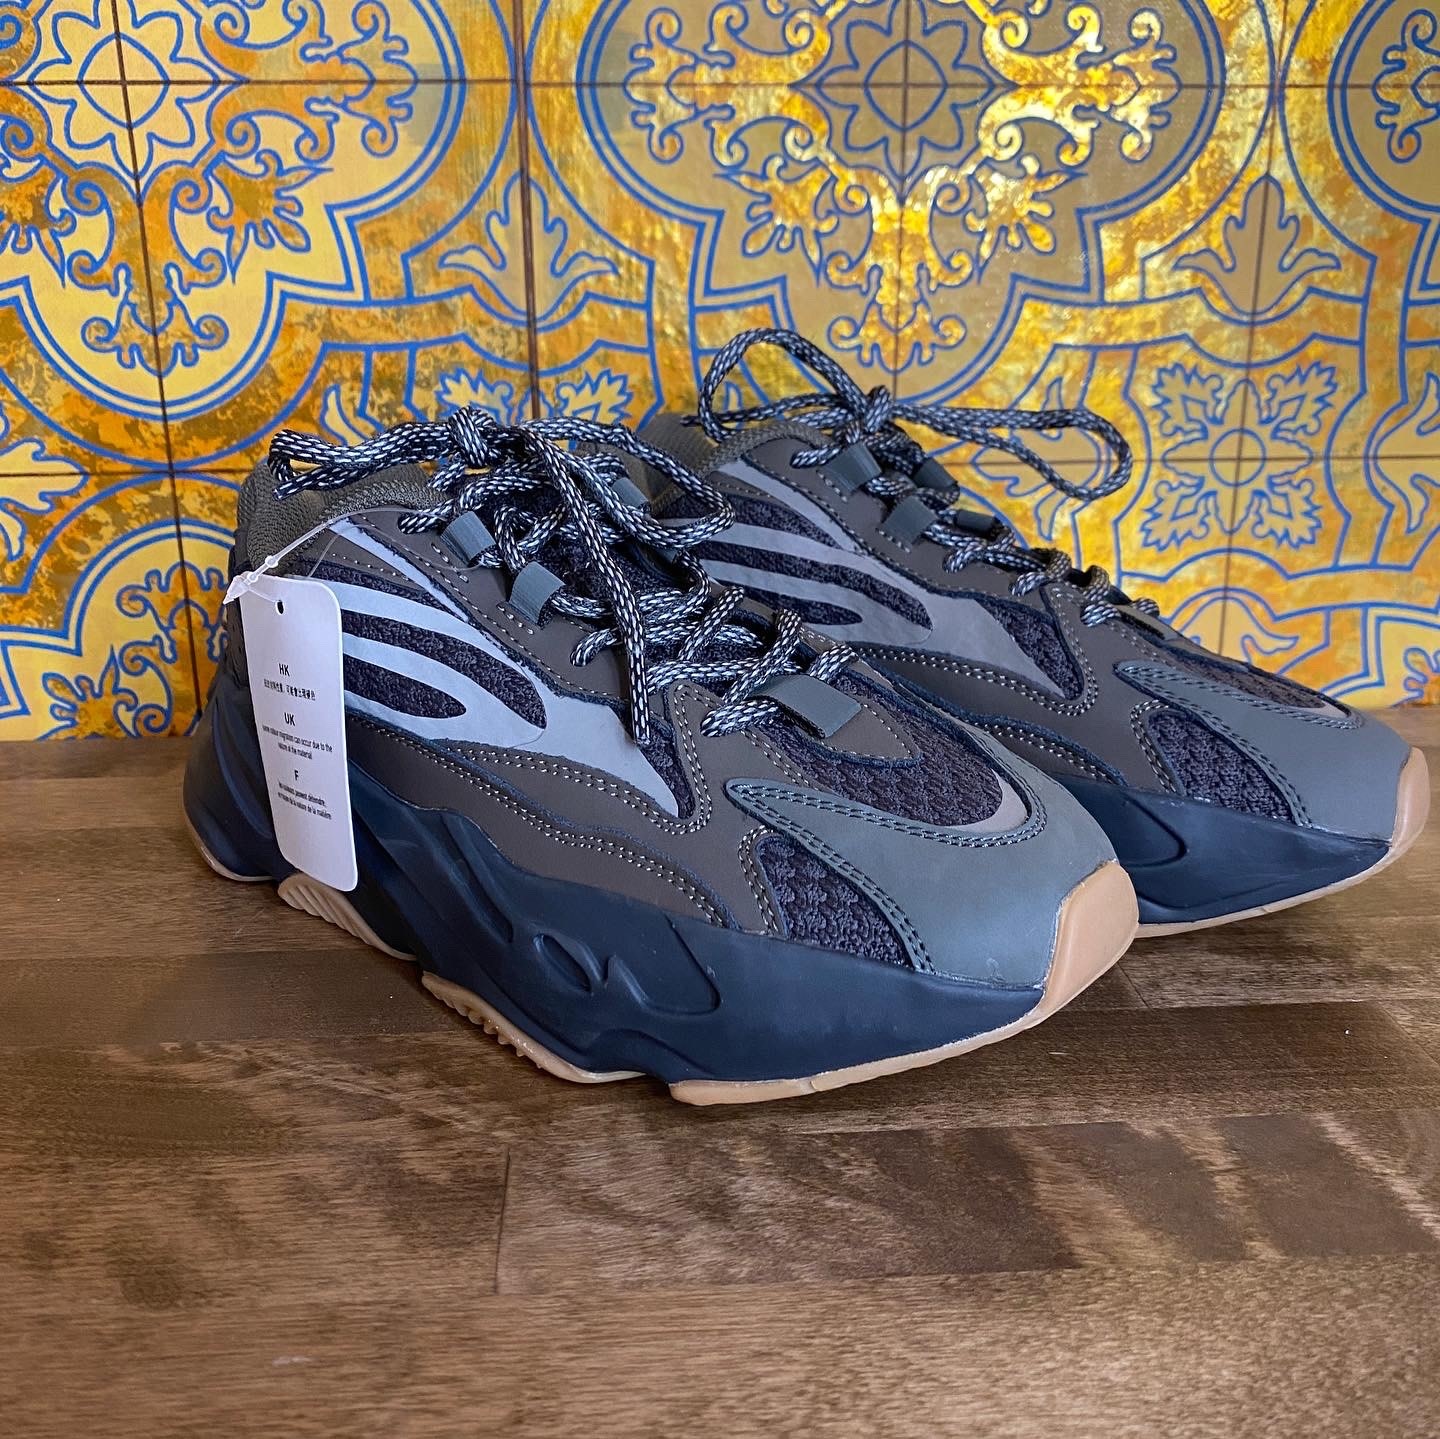 yeezy boost 700 dupe